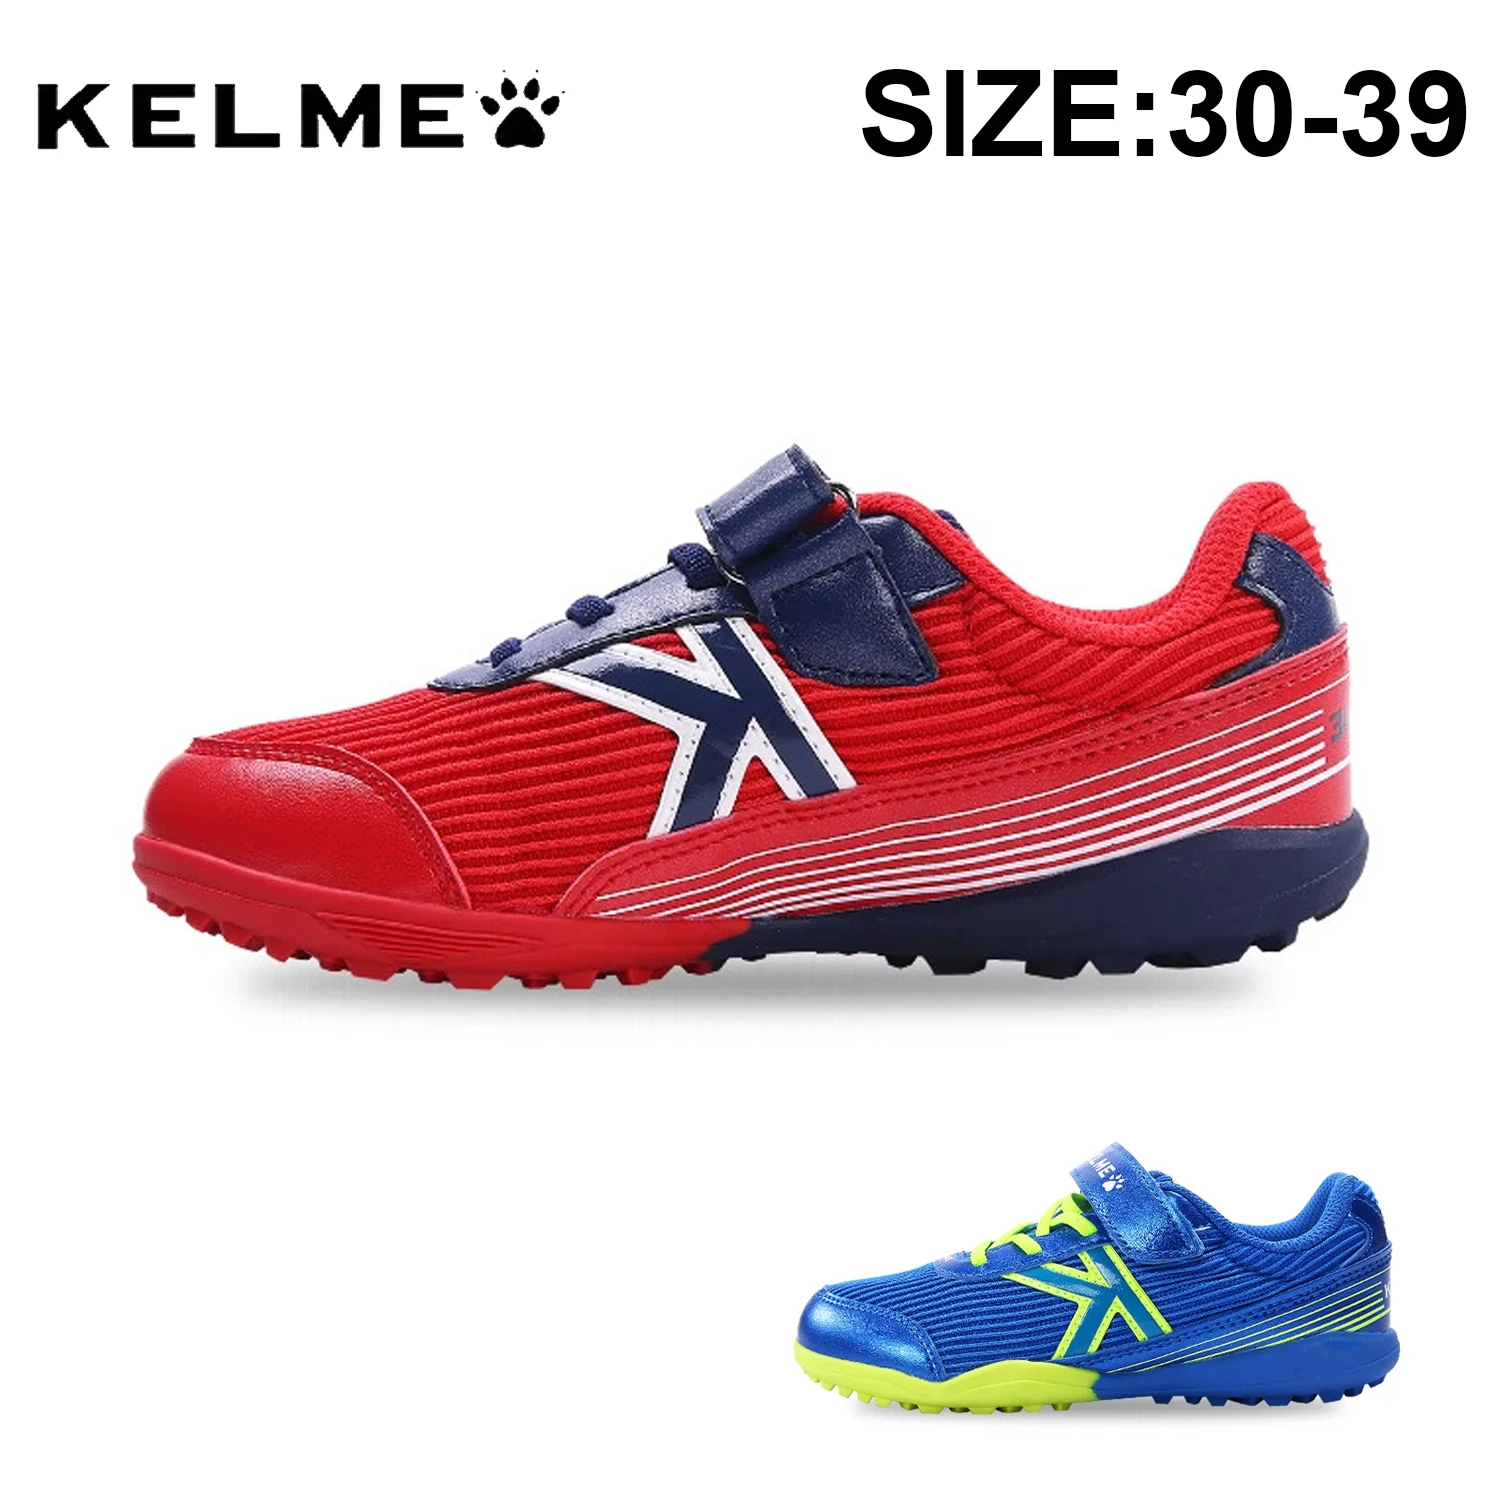 KELME Professional Kid's Soccer Shoes TF Crushed Spike Trainers Breathable Non-slip Children Sports Shoes Football Boots 6893171